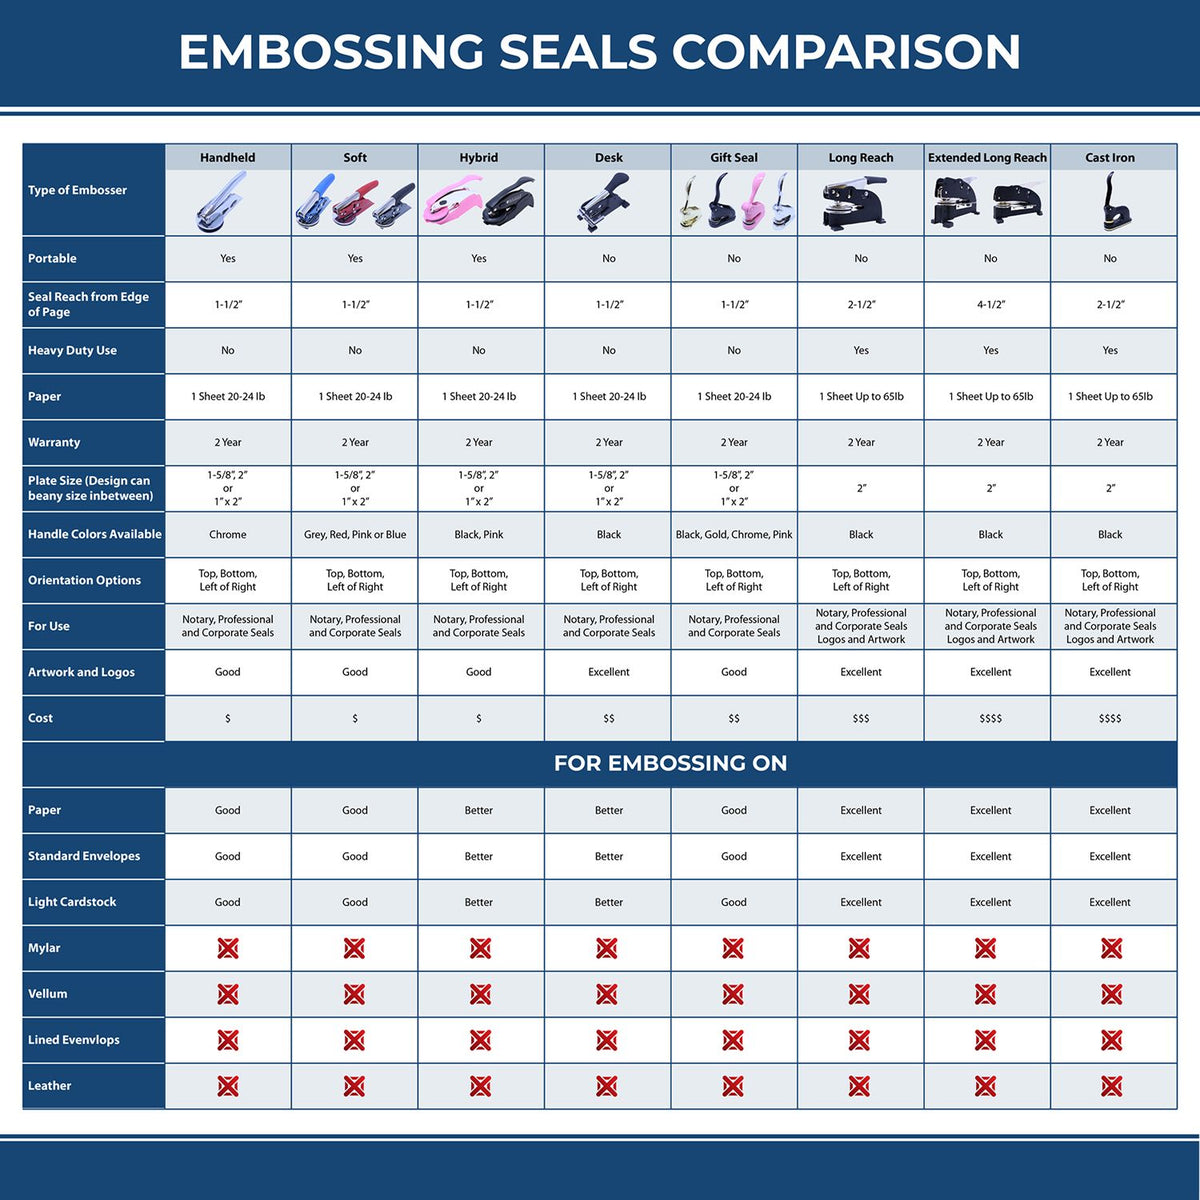 A comparison chart for the different types of mount models available for the Heavy Duty Cast Iron Virginia Geologist Seal Embosser